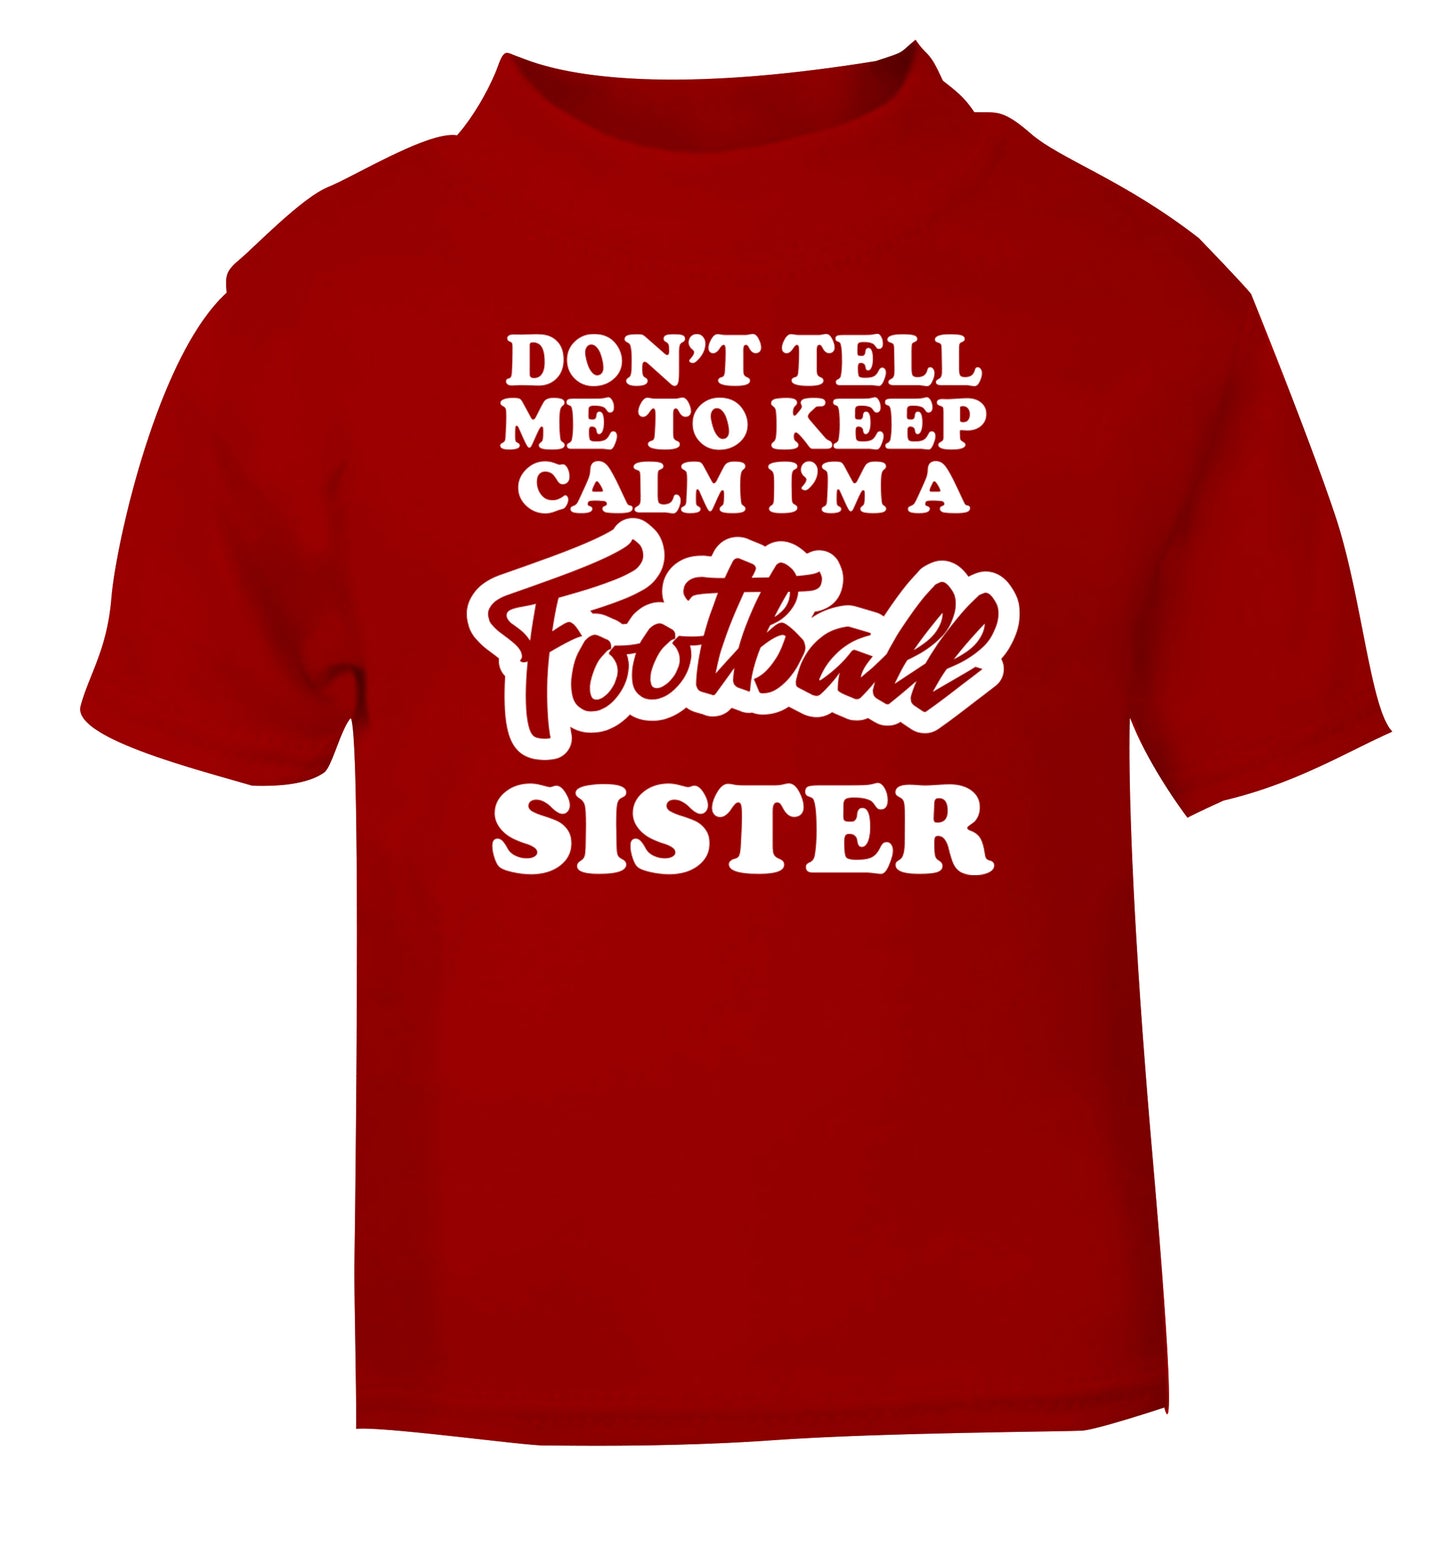 Don't tell me to keep calm I'm a football sister red Baby Toddler Tshirt 2 Years